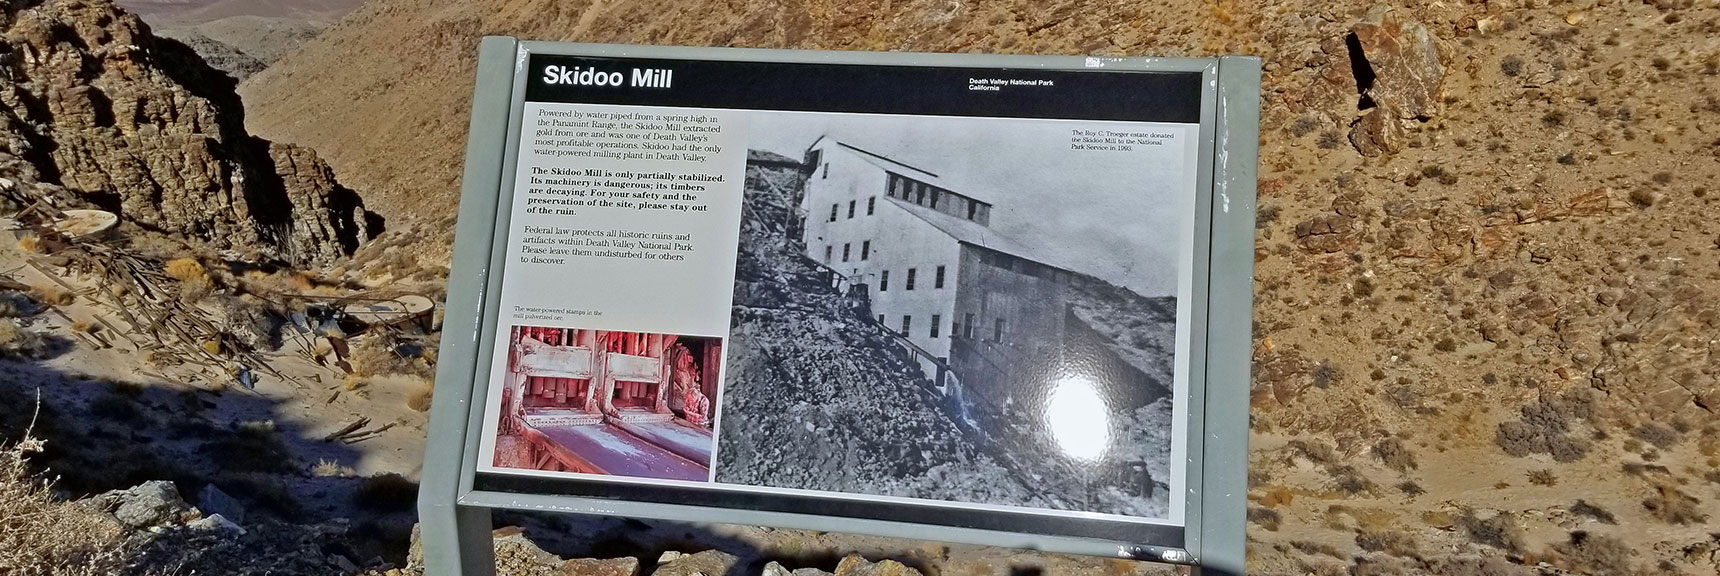 Skidoo Stamp Mill in Operation Condition 1907-1917 | Skidoo Stamp Mill, Panamint Mountains, Death Valley National Park, CA